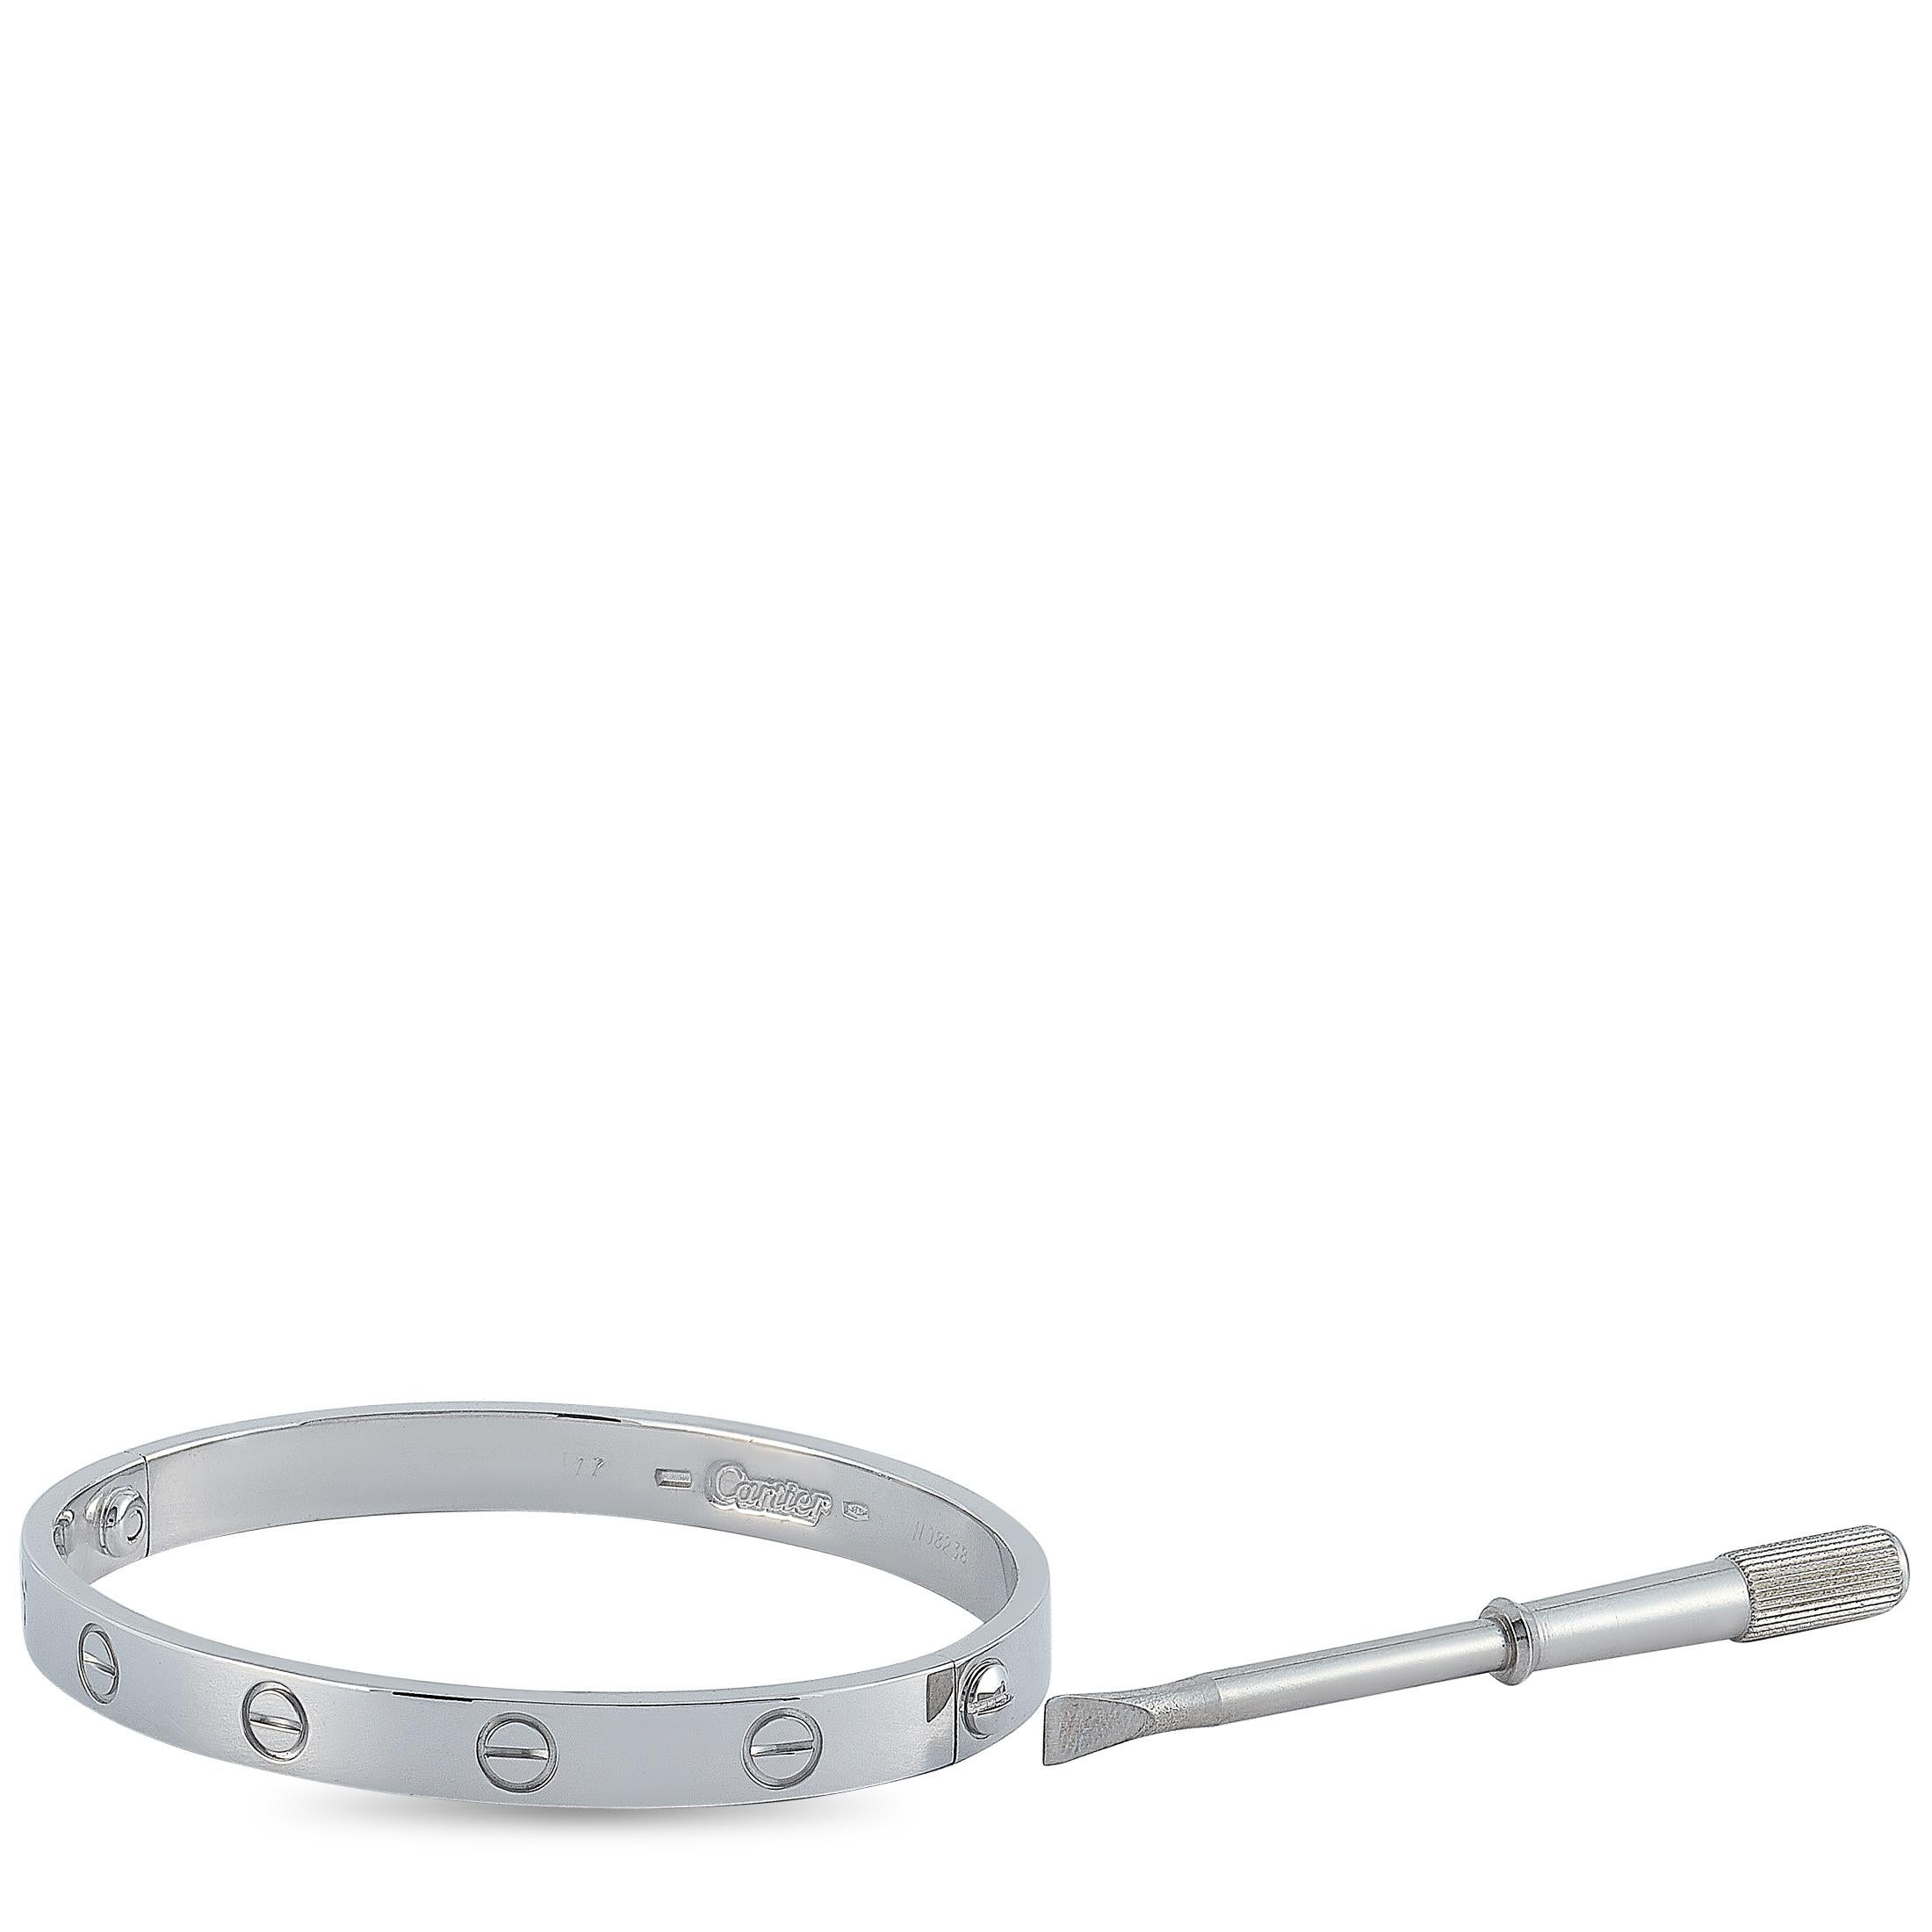 The Cartier “LOVE” bracelet is crafted from 18K white gold and measures 6.7” in length. The bracelet weighs 32 grams and is delivered with a screwdriver.

This jewelry piece is offered in estate condition and includes the a gift box.